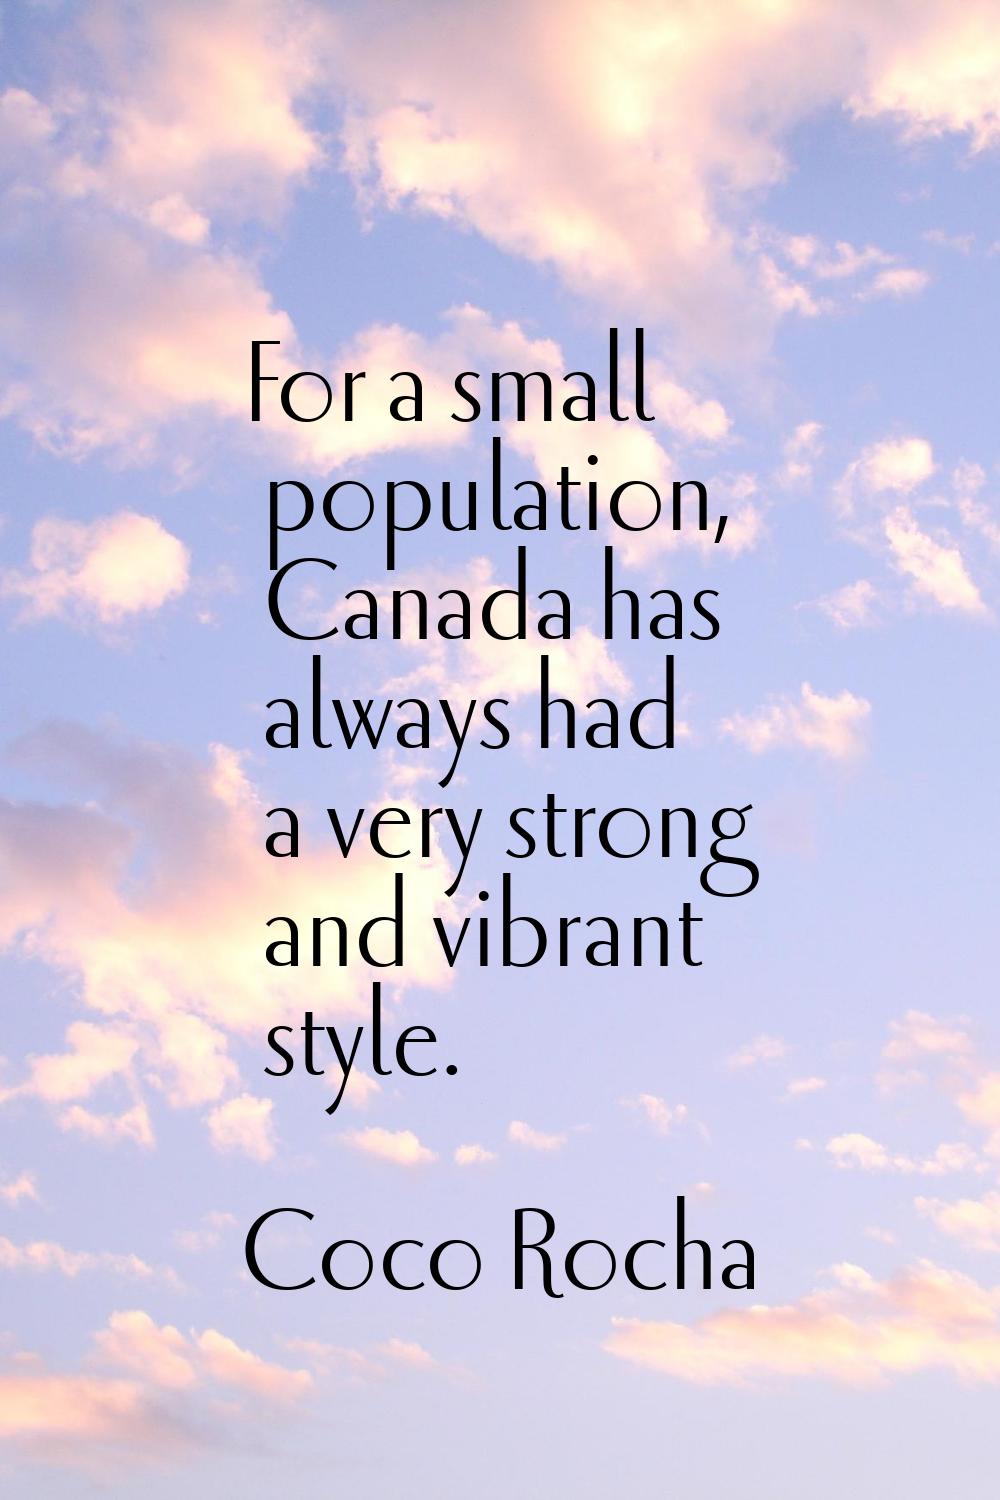 For a small population, Canada has always had a very strong and vibrant style.